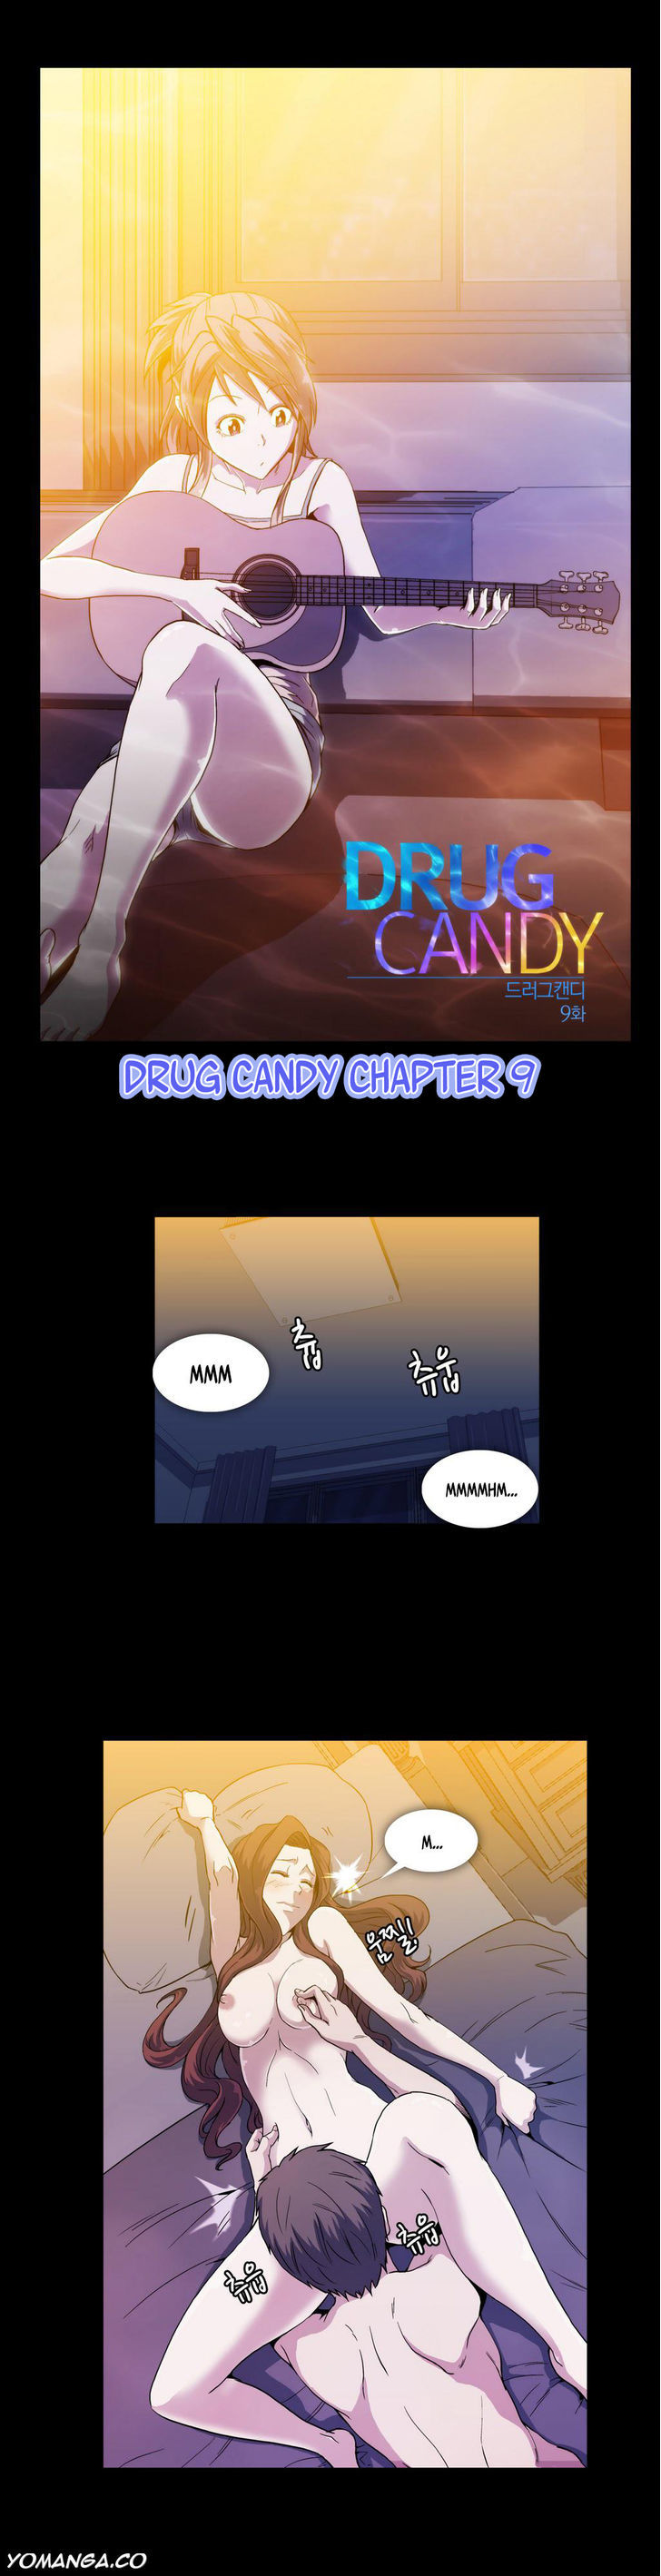 Drug Candy Chapter 9 - Page 2